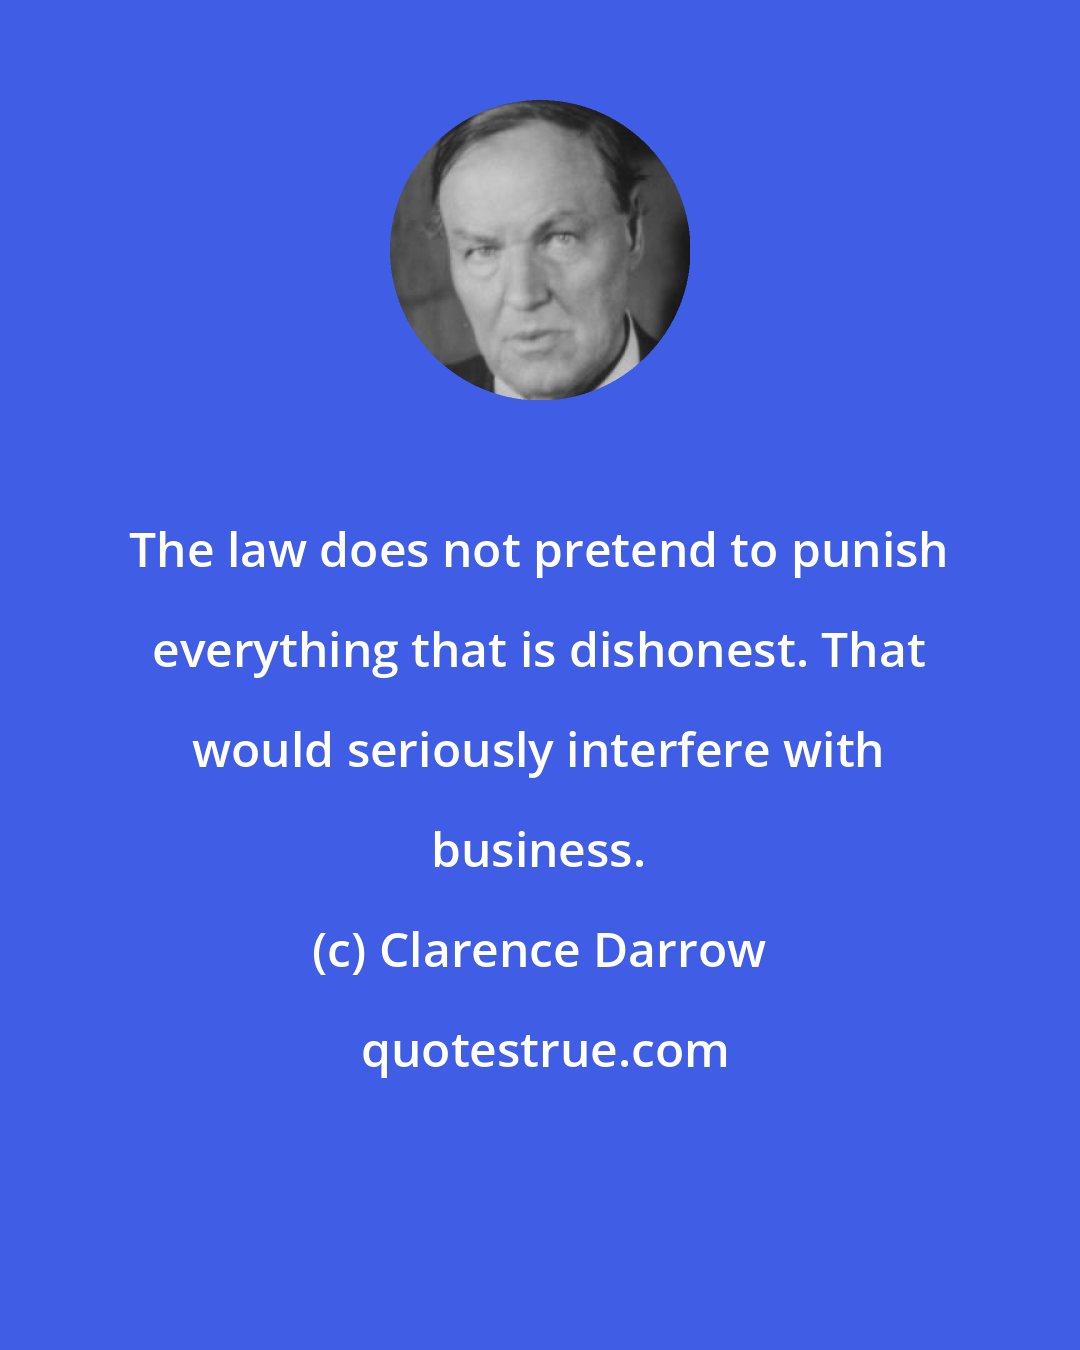 Clarence Darrow: The law does not pretend to punish everything that is dishonest. That would seriously interfere with business.